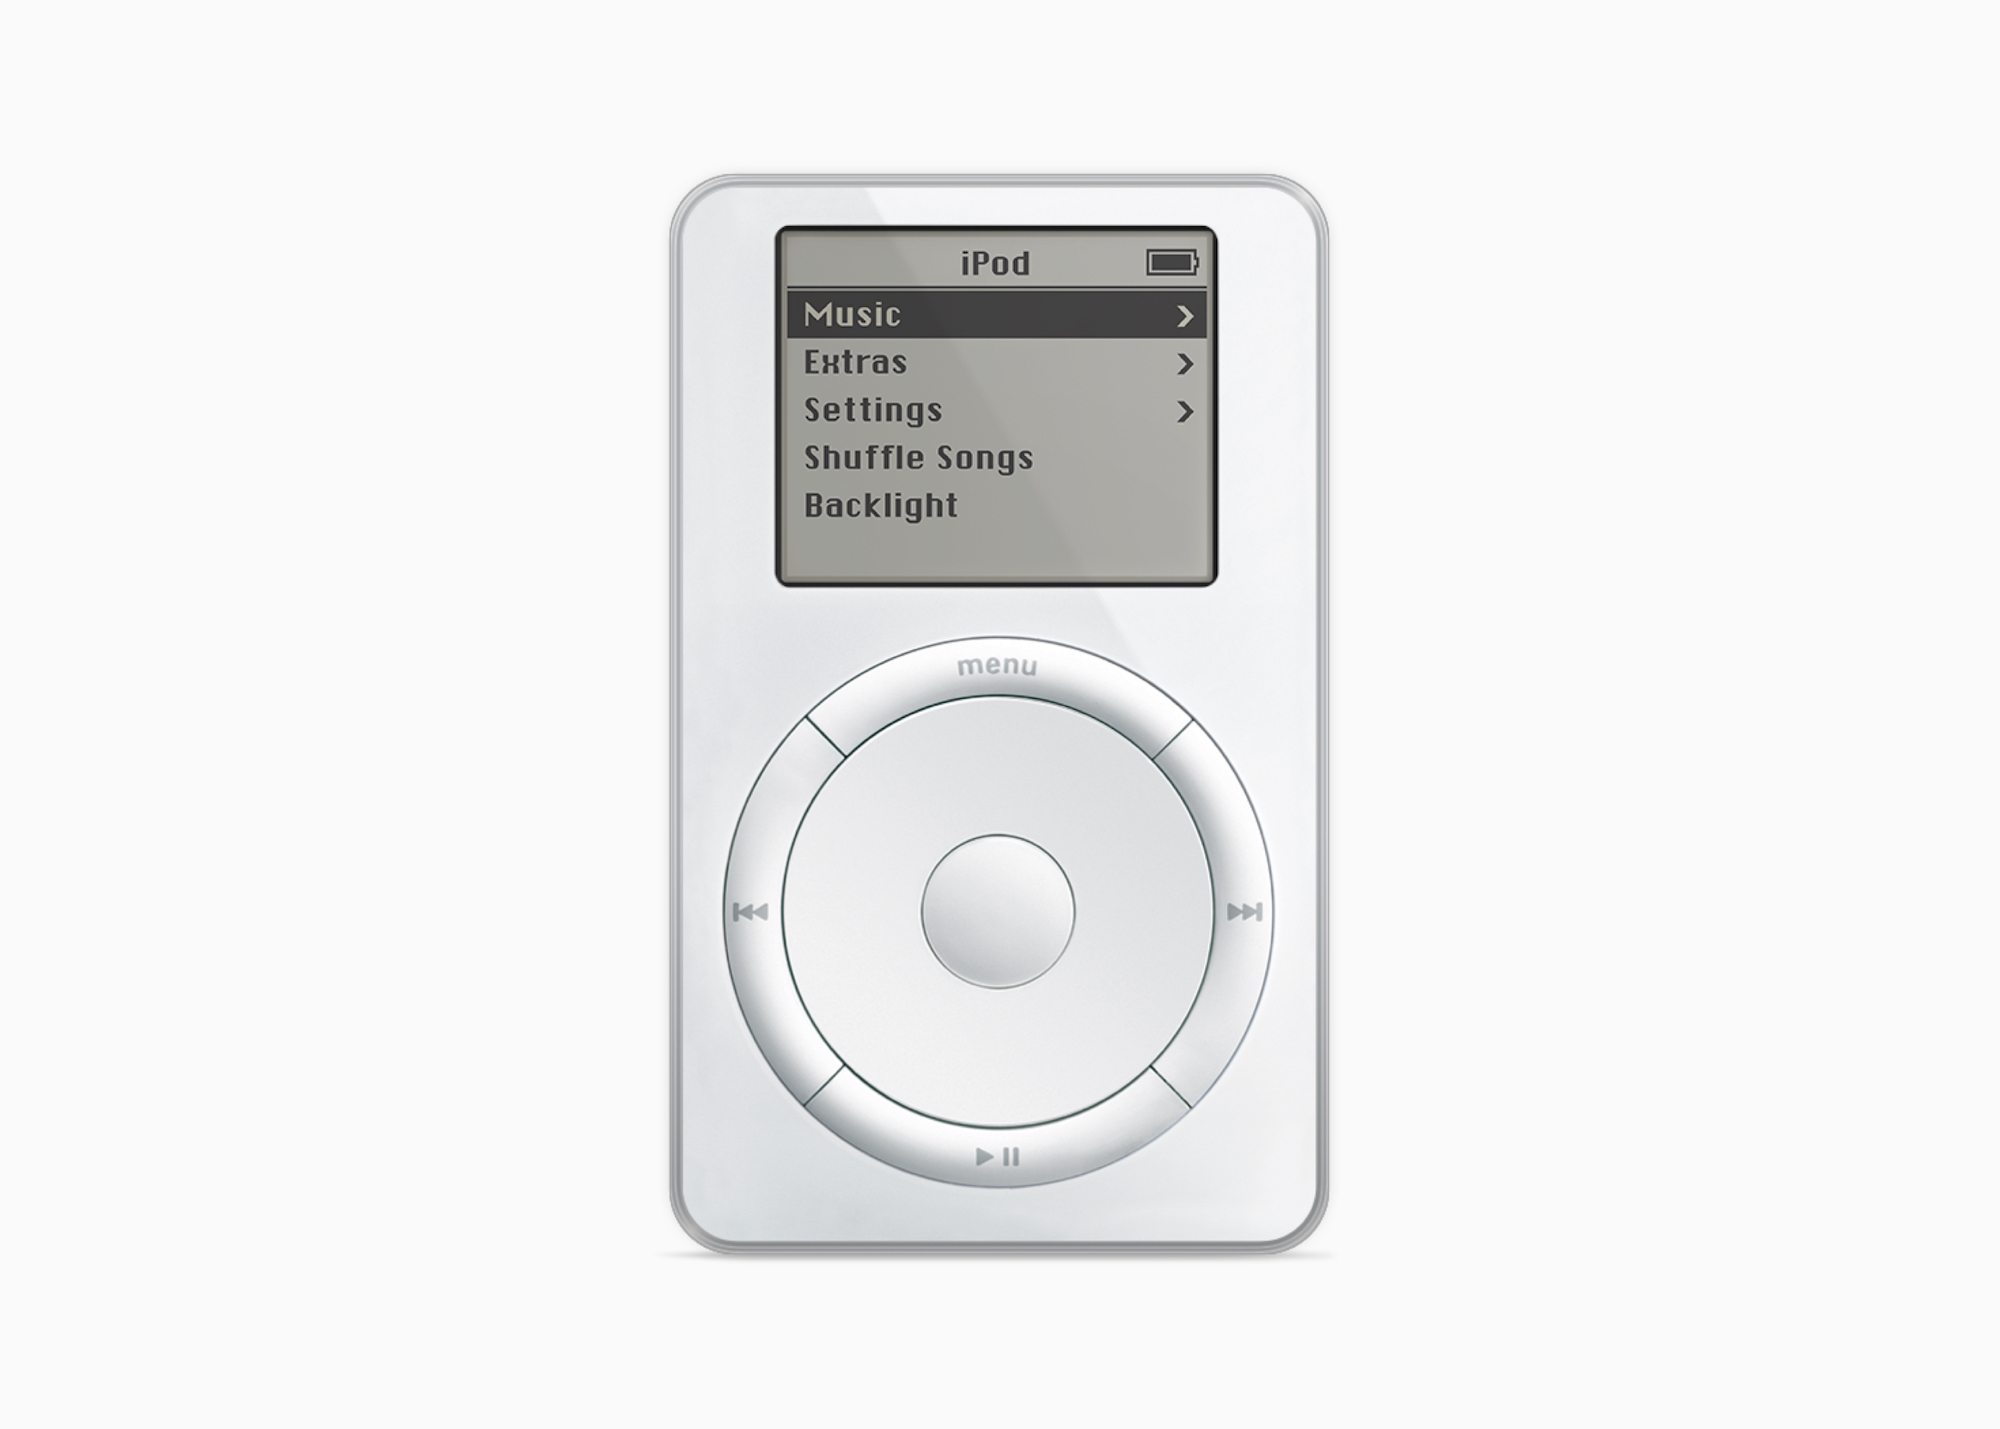 iPod classic: Everything We Know